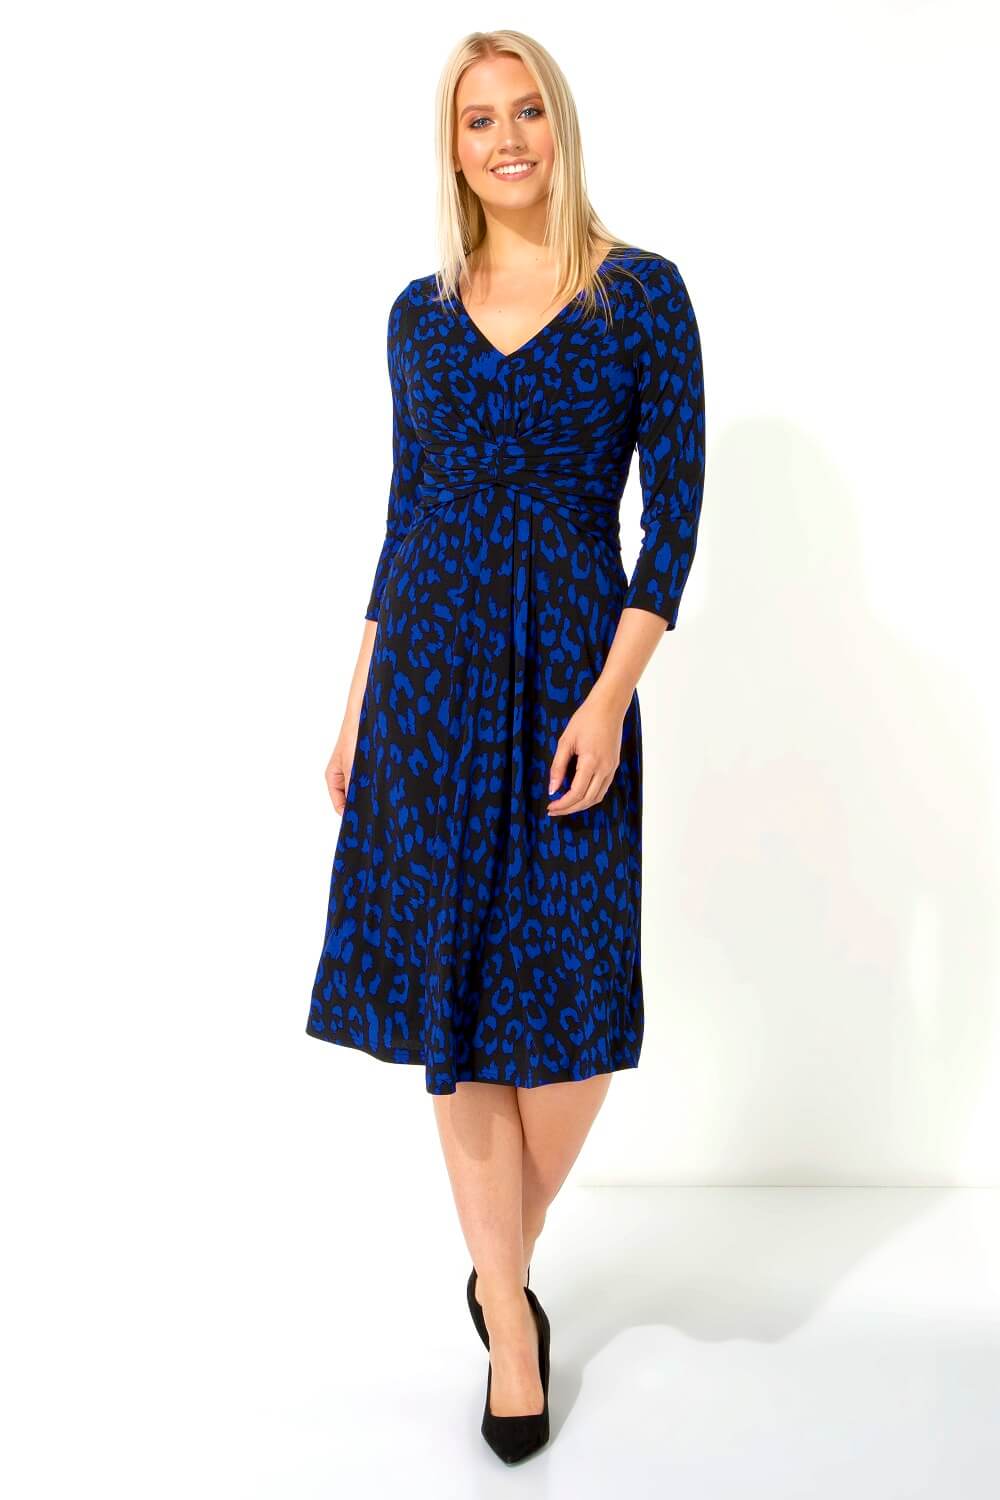 Royal Blue Leopard Print Fit And Flare Dress, Image 2 of 5